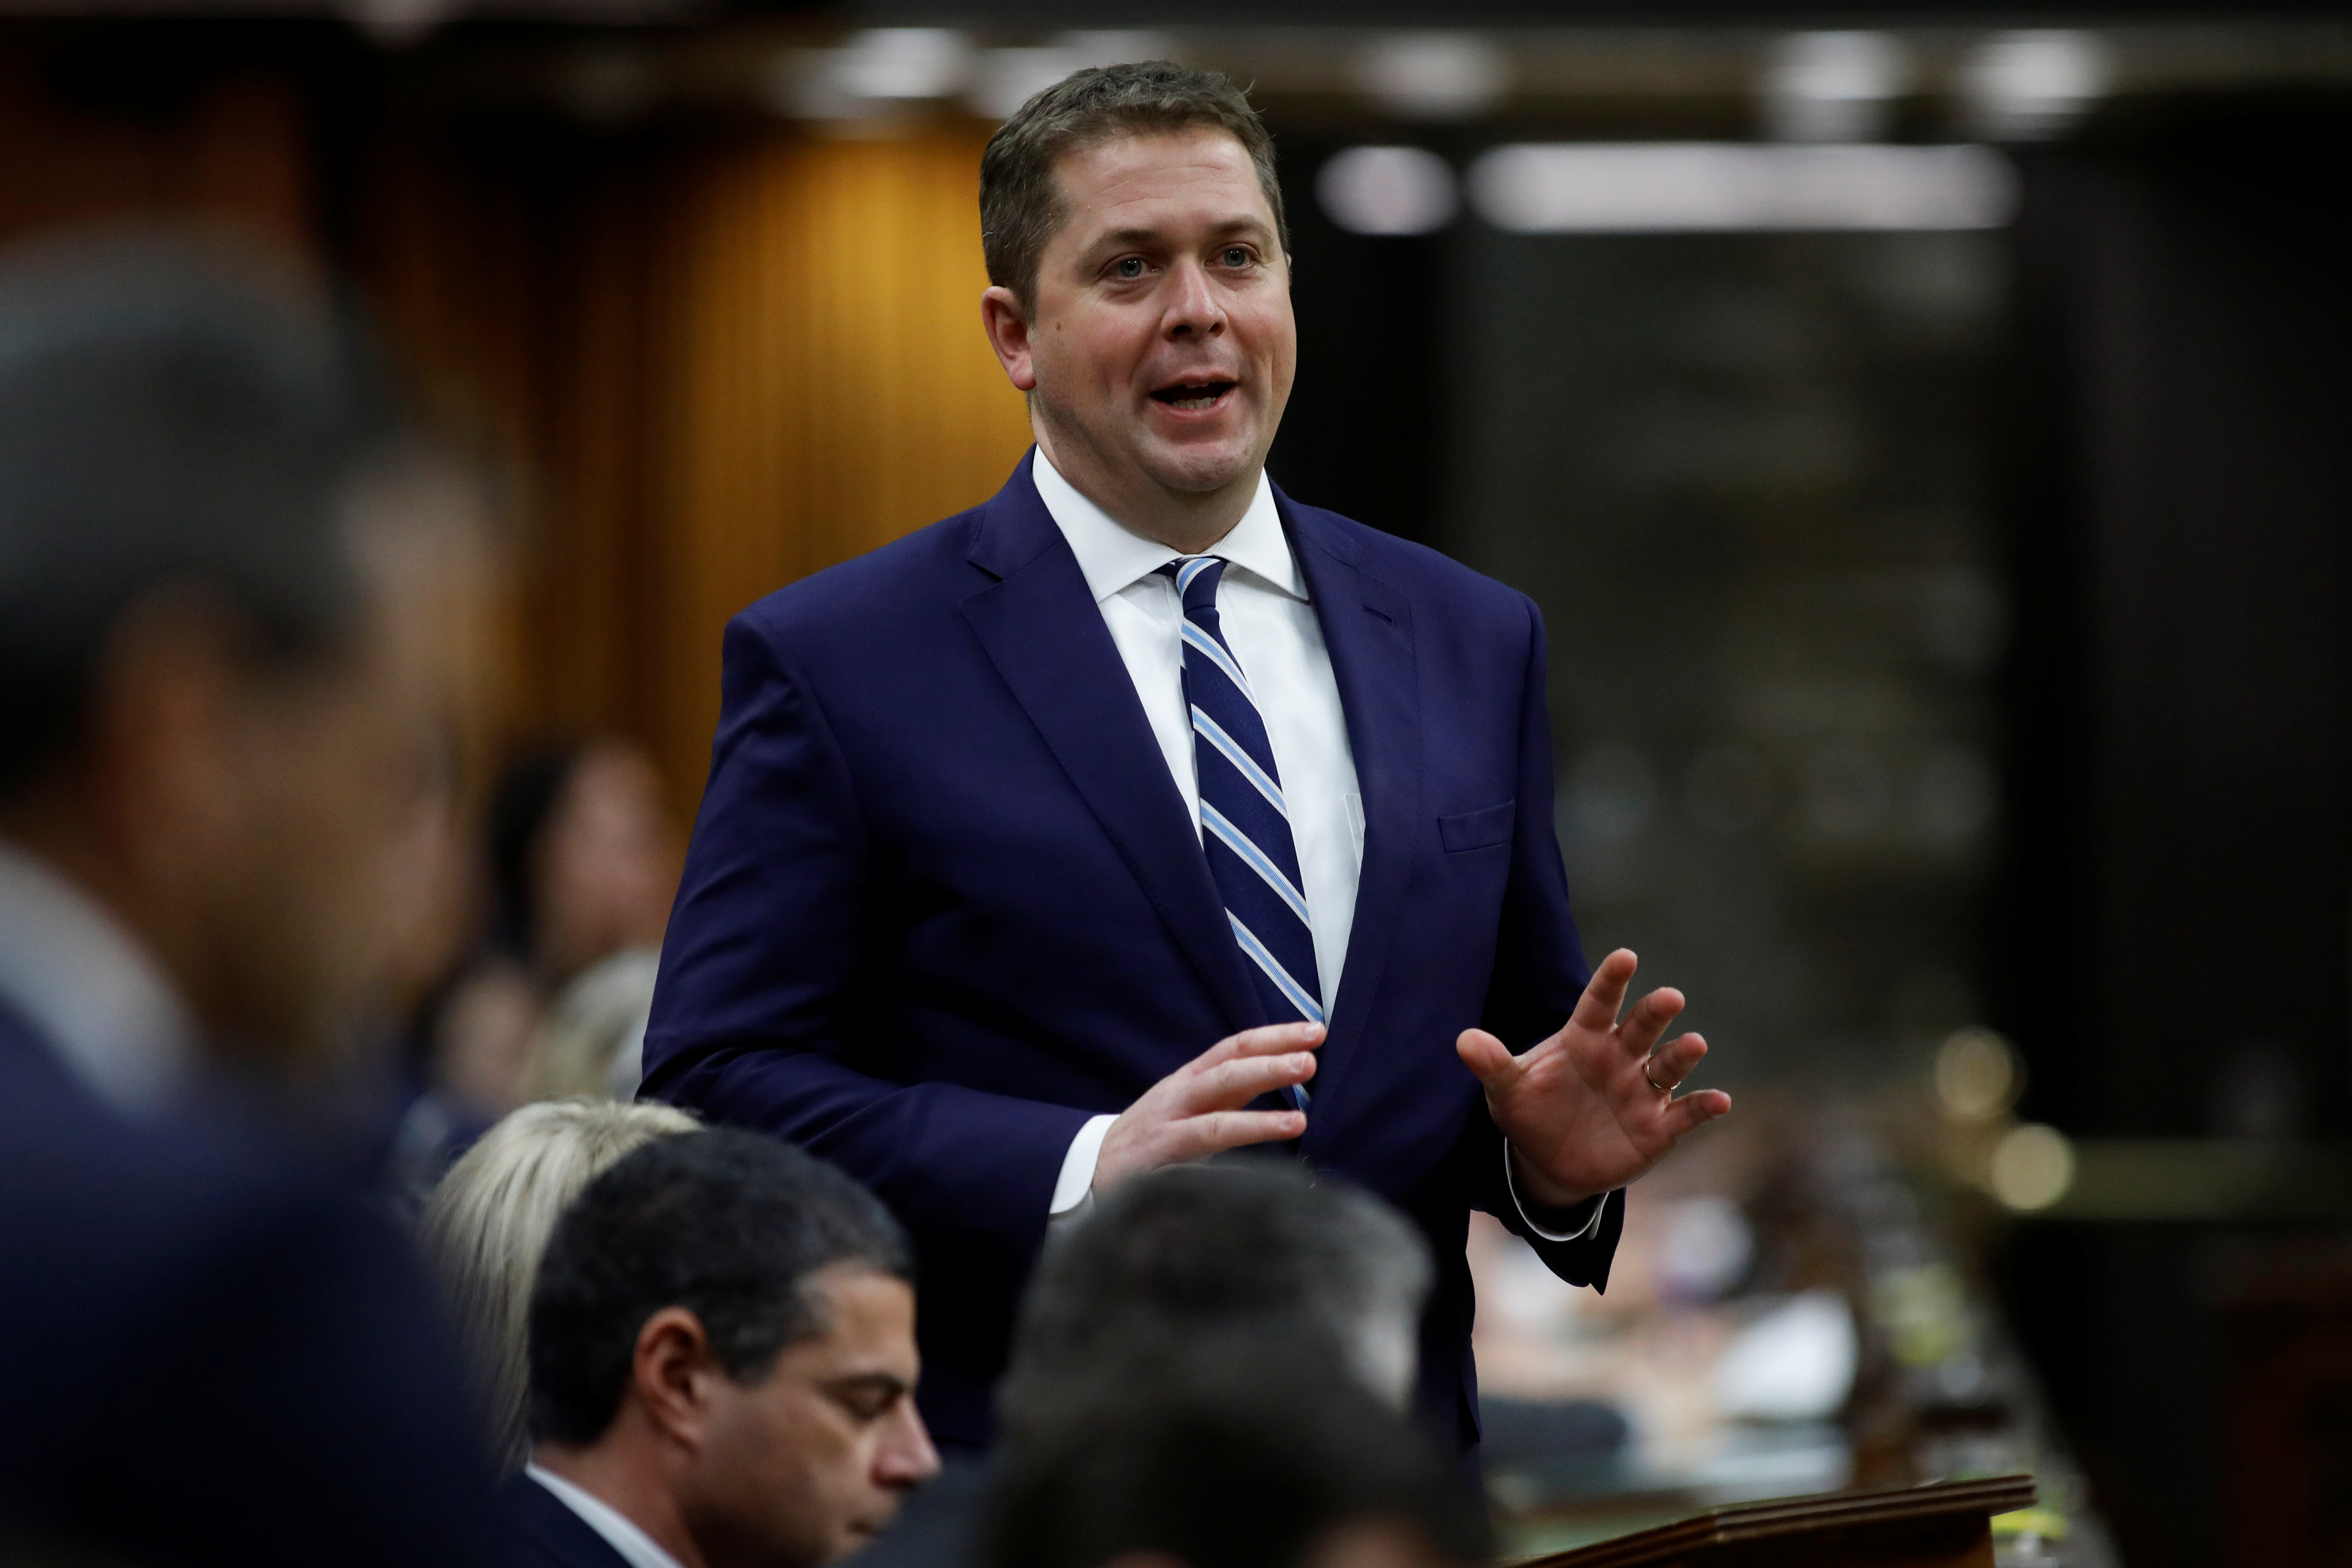 Canada's Conservative Party leader Andrew Scheer speaks during Question Period in the House of Commons on Parliament Hill in Ottawa, Ontario, Canada March 11, 2020. REUTERS/Blair Gable